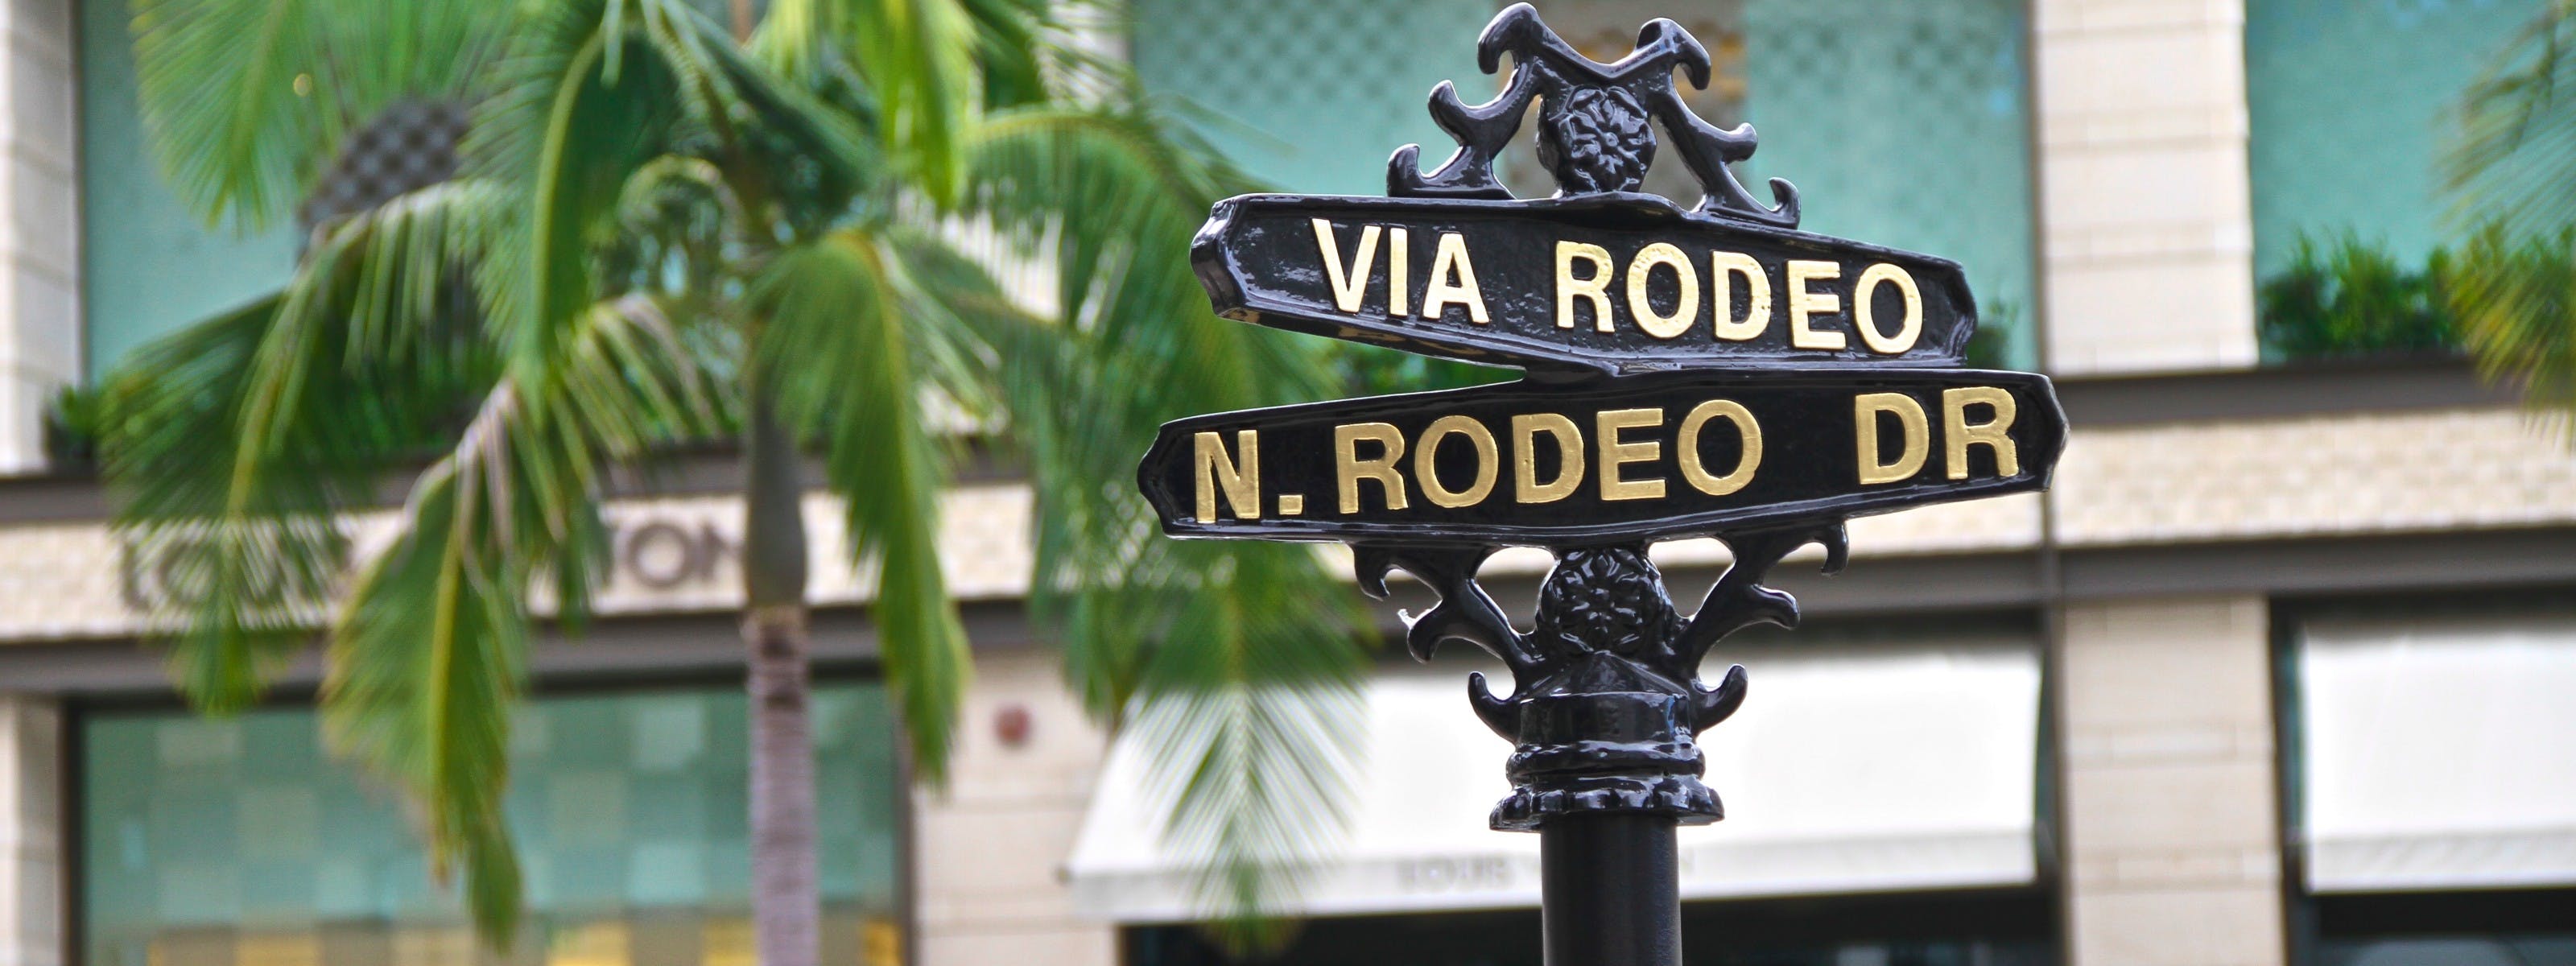 Affordable Shopping On Rodeo Drive